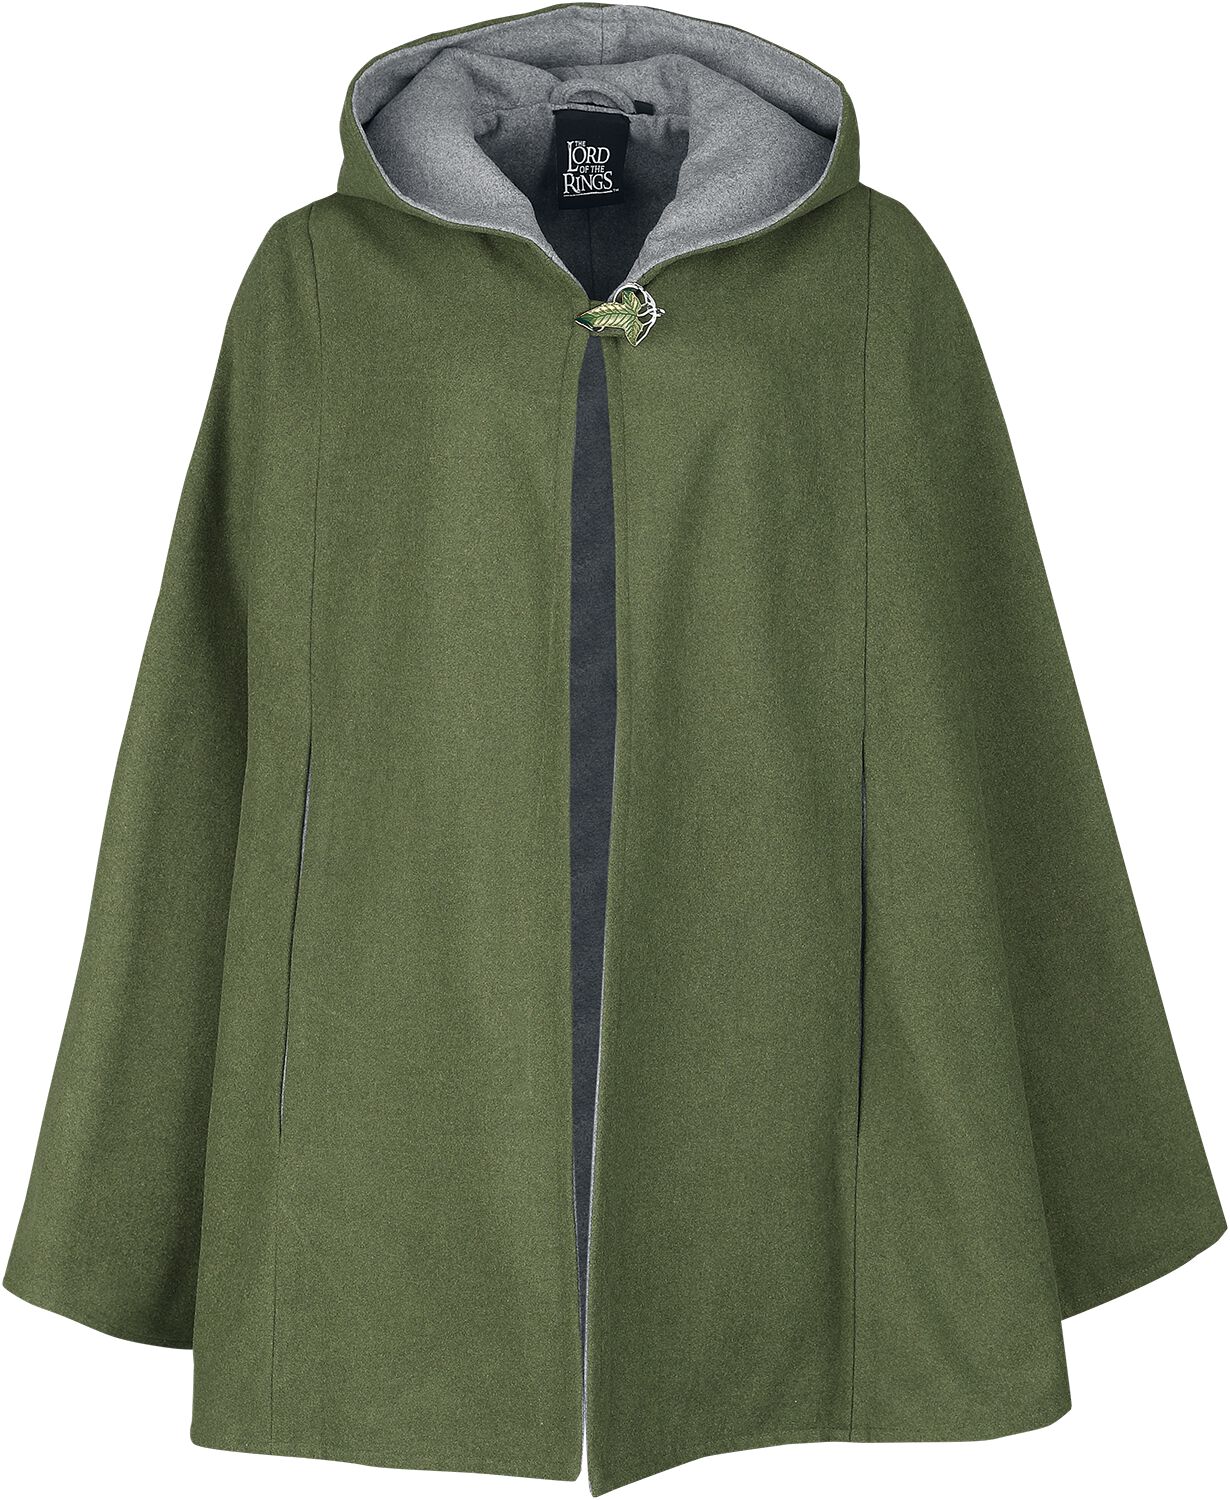 The Lord Of The Rings Frodo Cape green grey